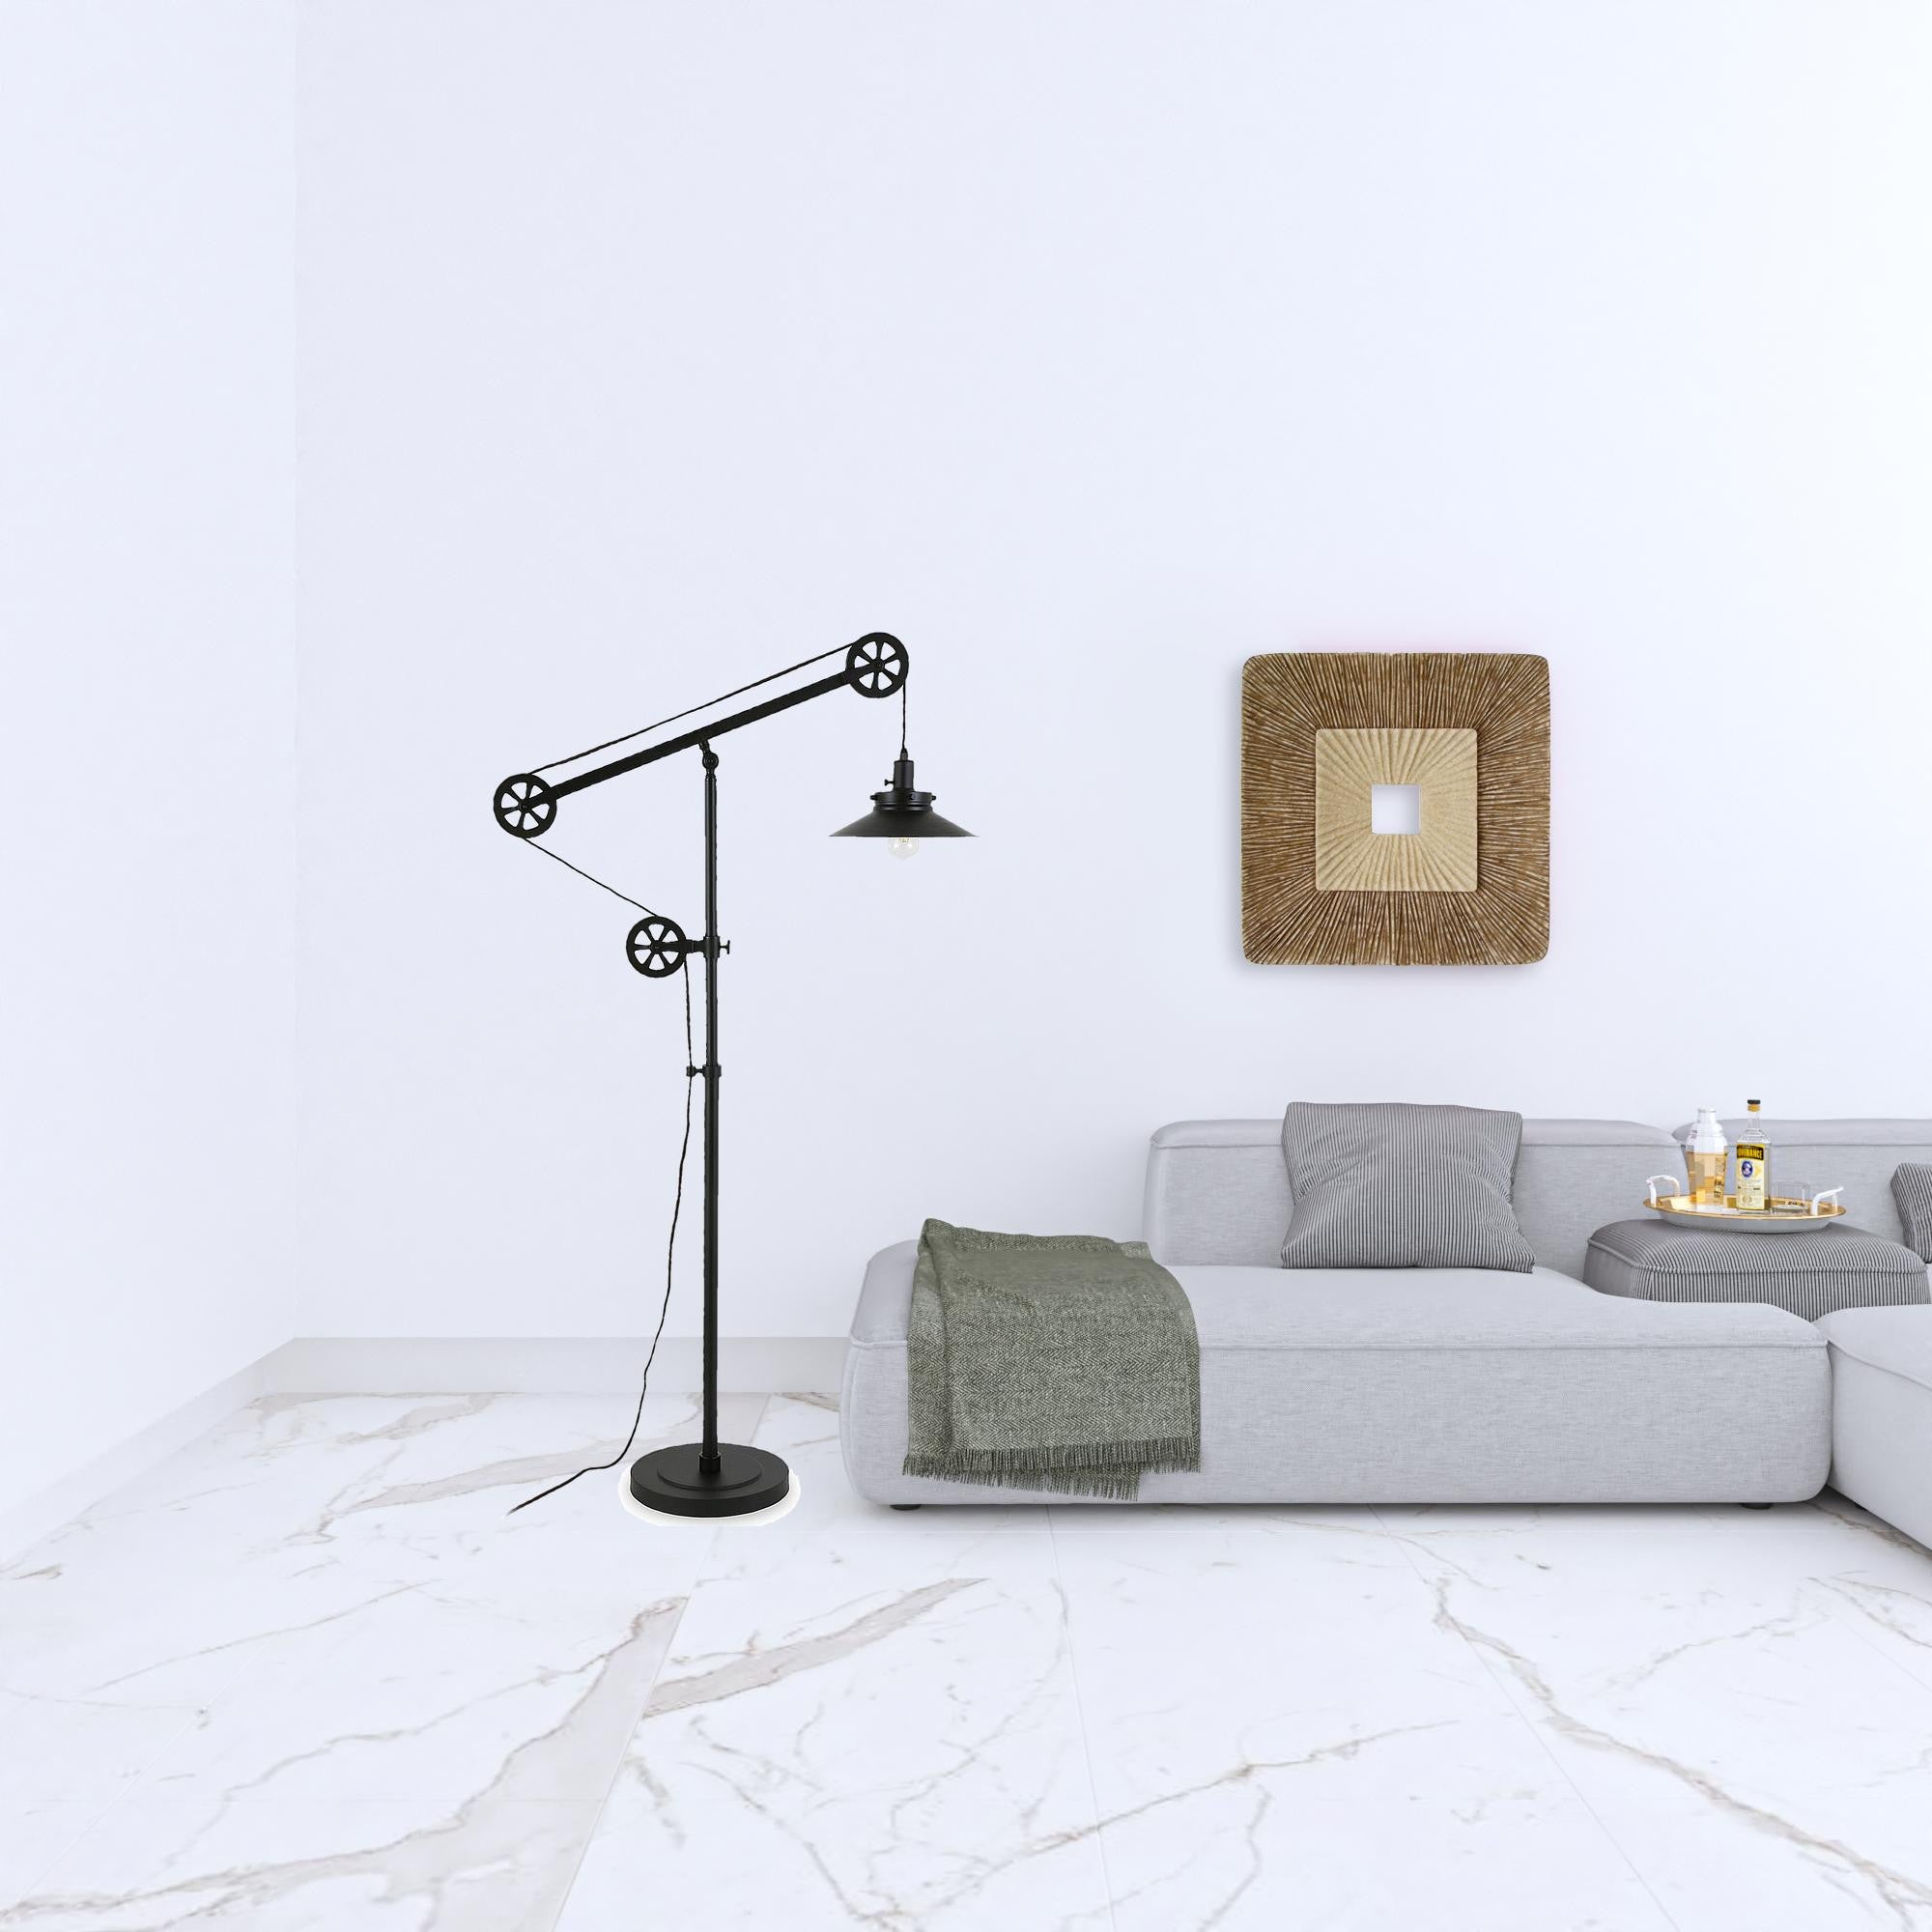 63" Black Reading Floor Lamp With Black Cone Shade